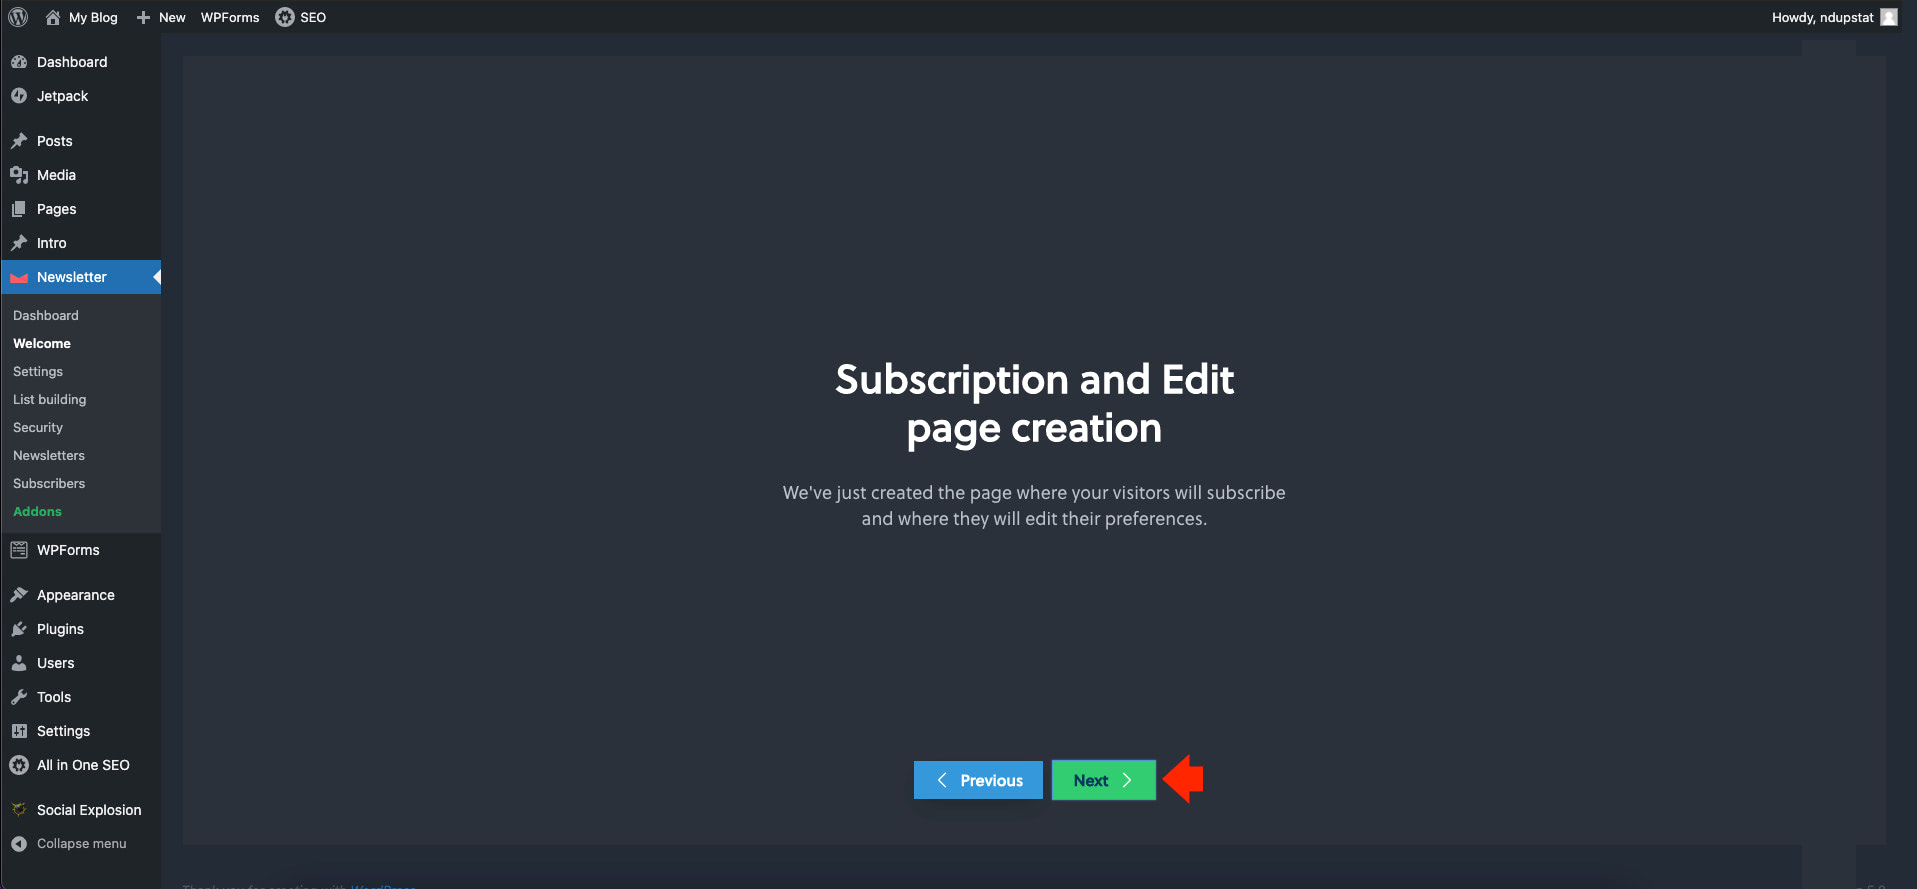 Subscription and Edit page creation